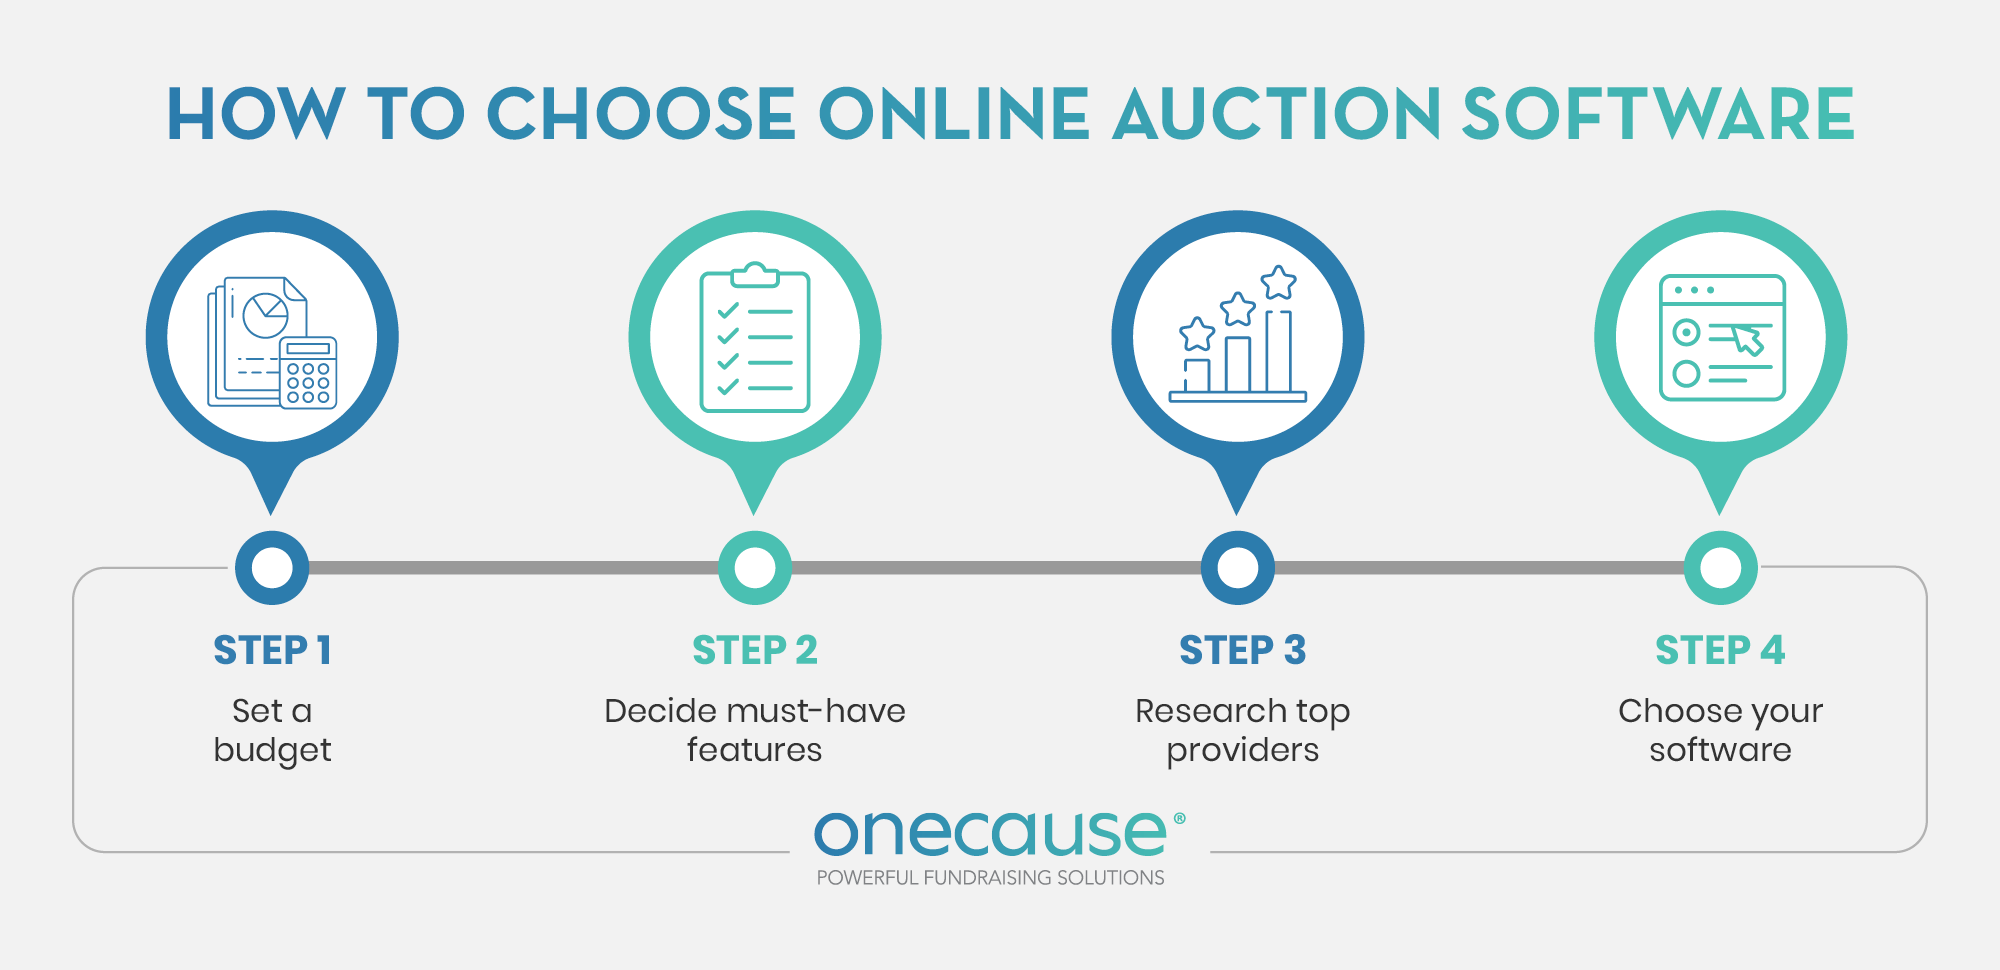 This image lists the steps to choosing software for your online charity auction, also discussed in the text below.